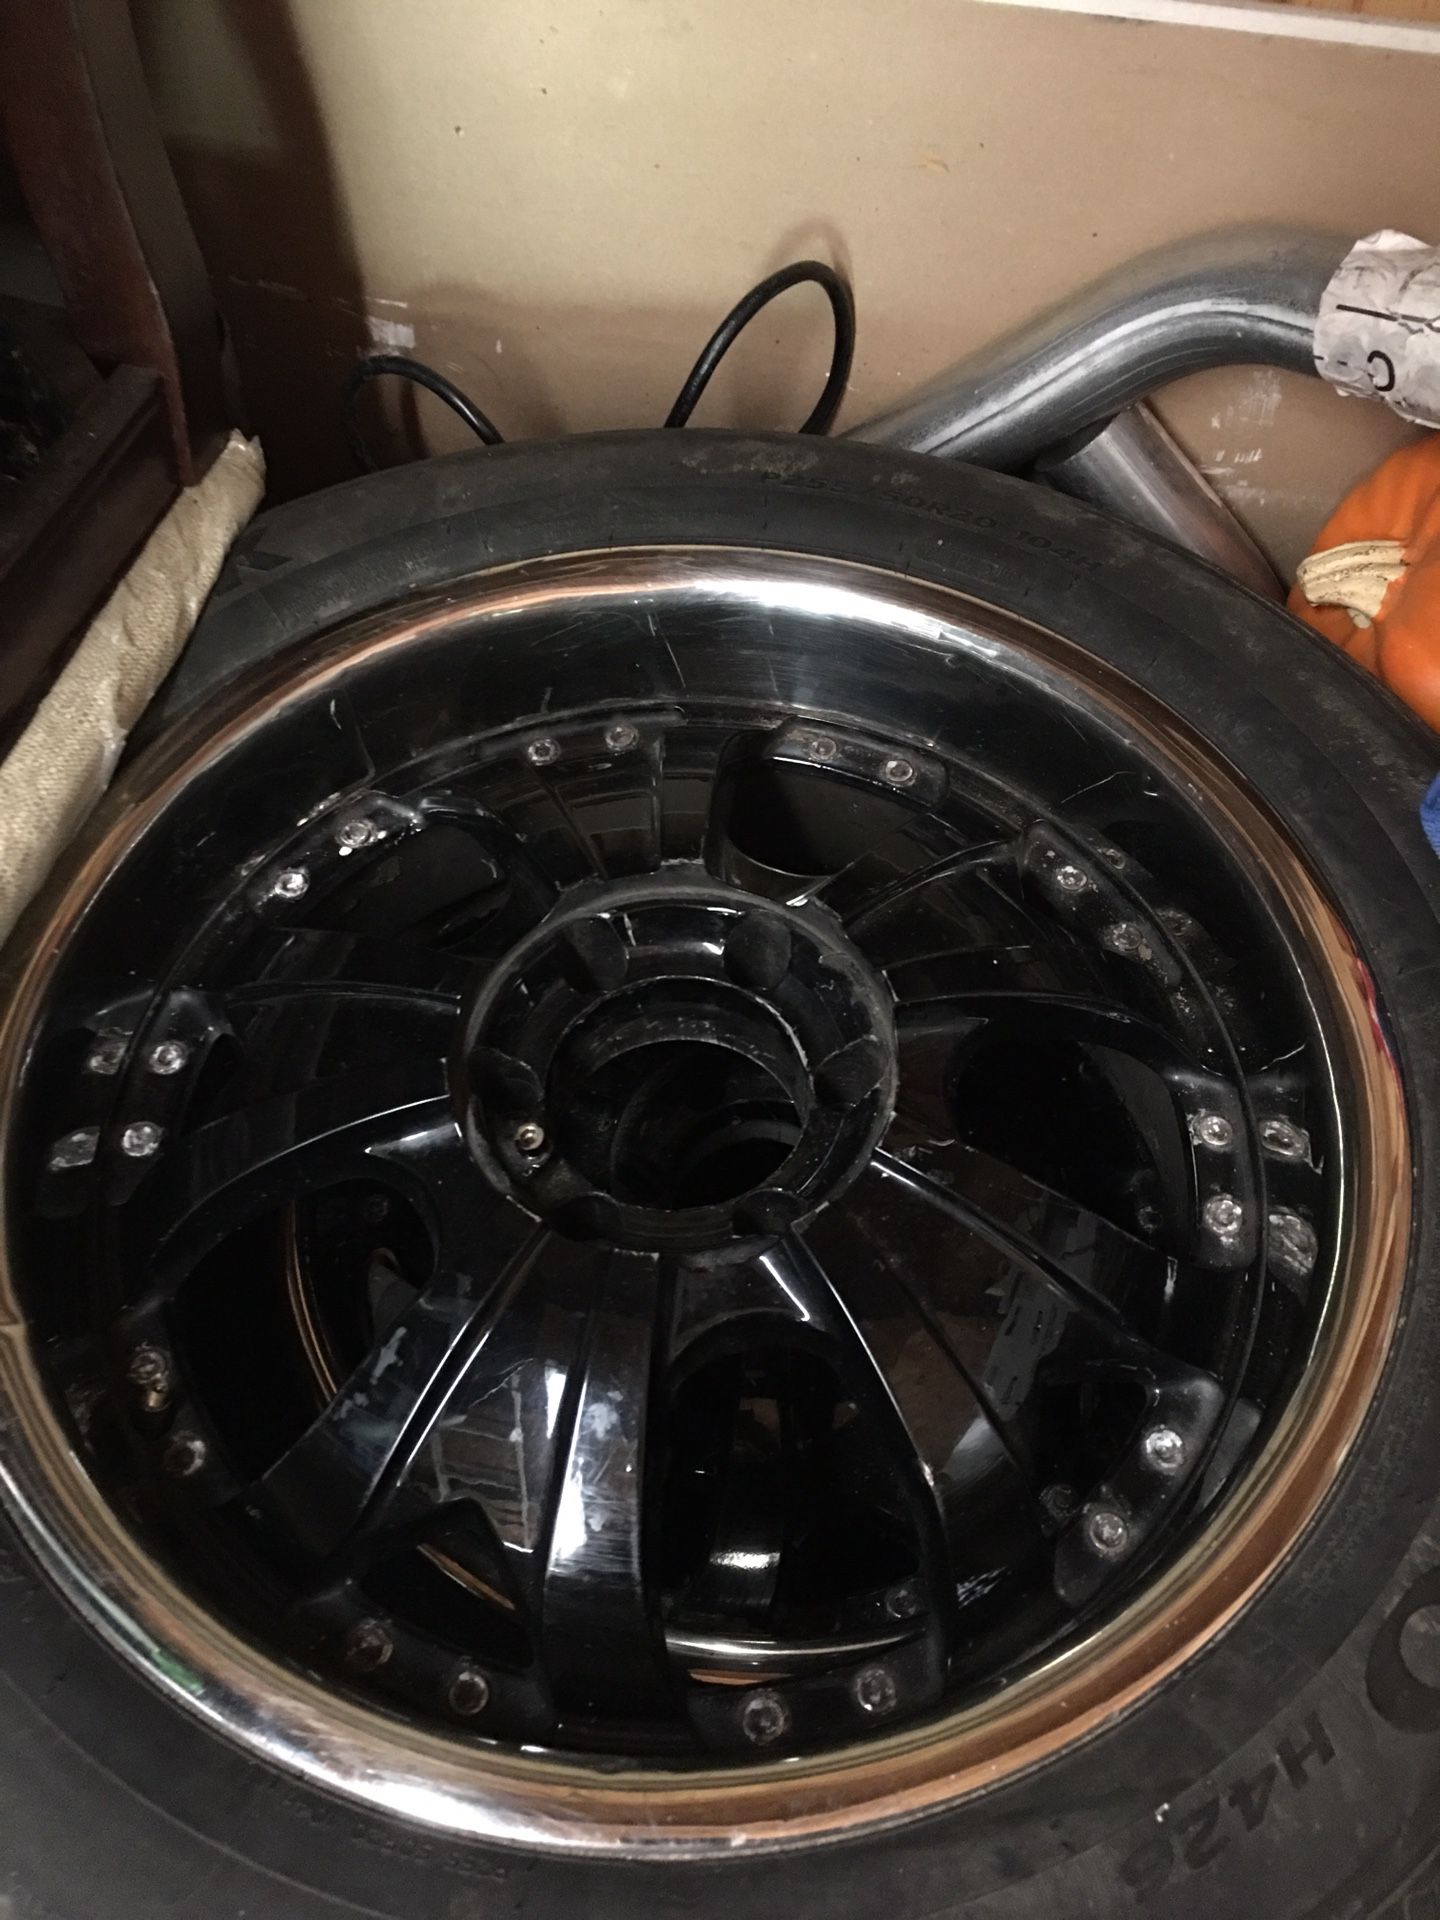 20 inch rims. Brand new tires!